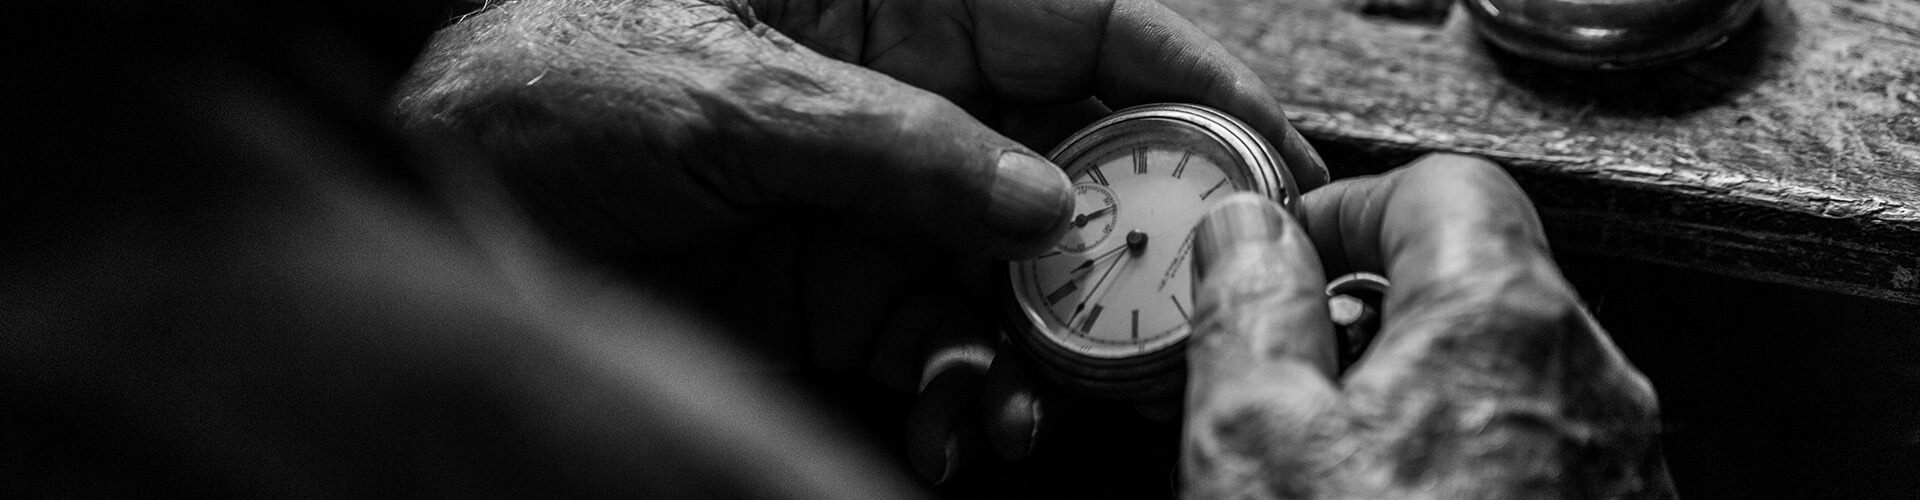 older persons hands holding a watch 